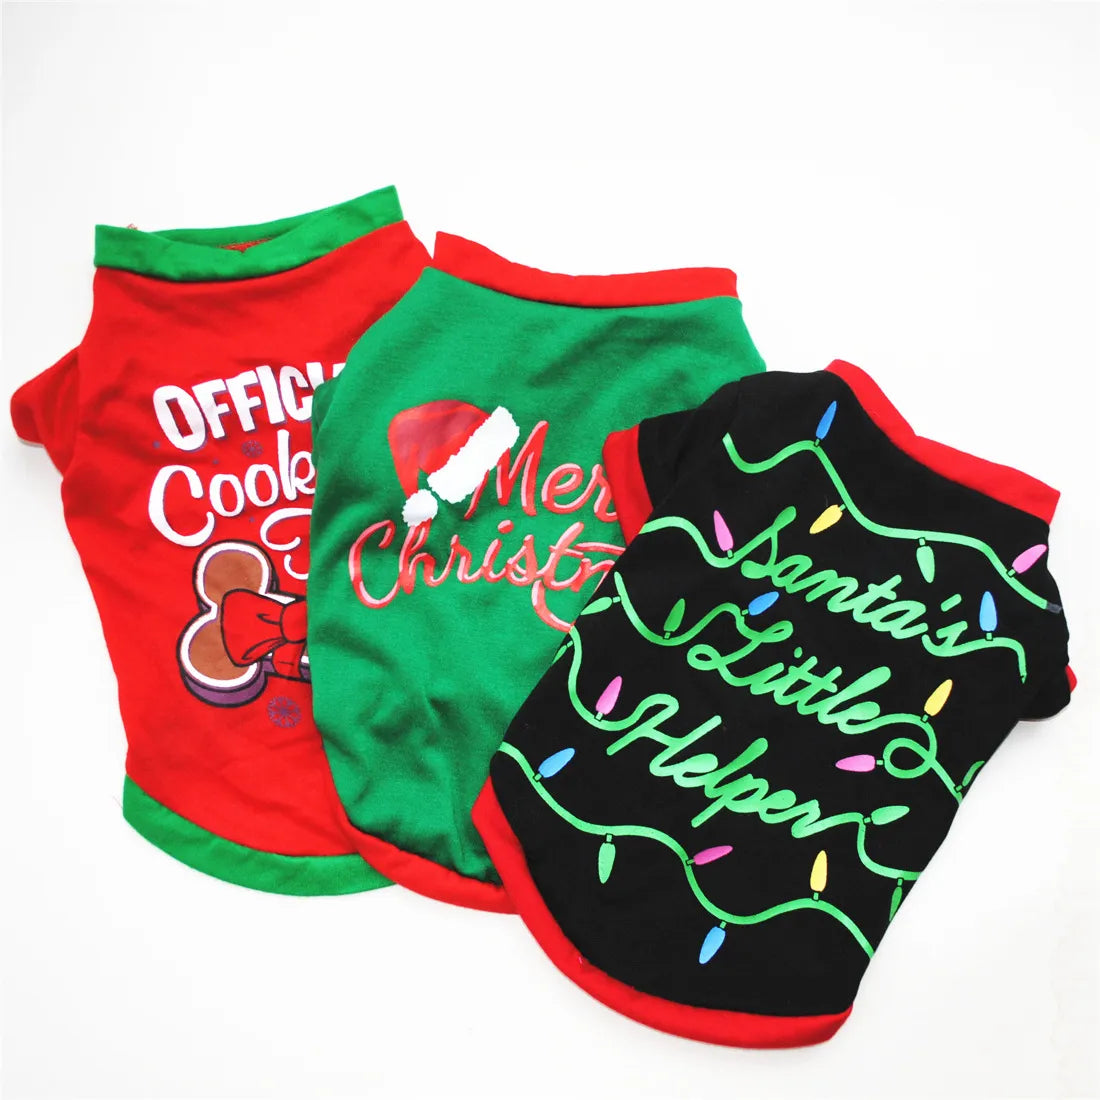 Festive Pup Couture: Christmas Dog Clothes for Small to Medium Dogs